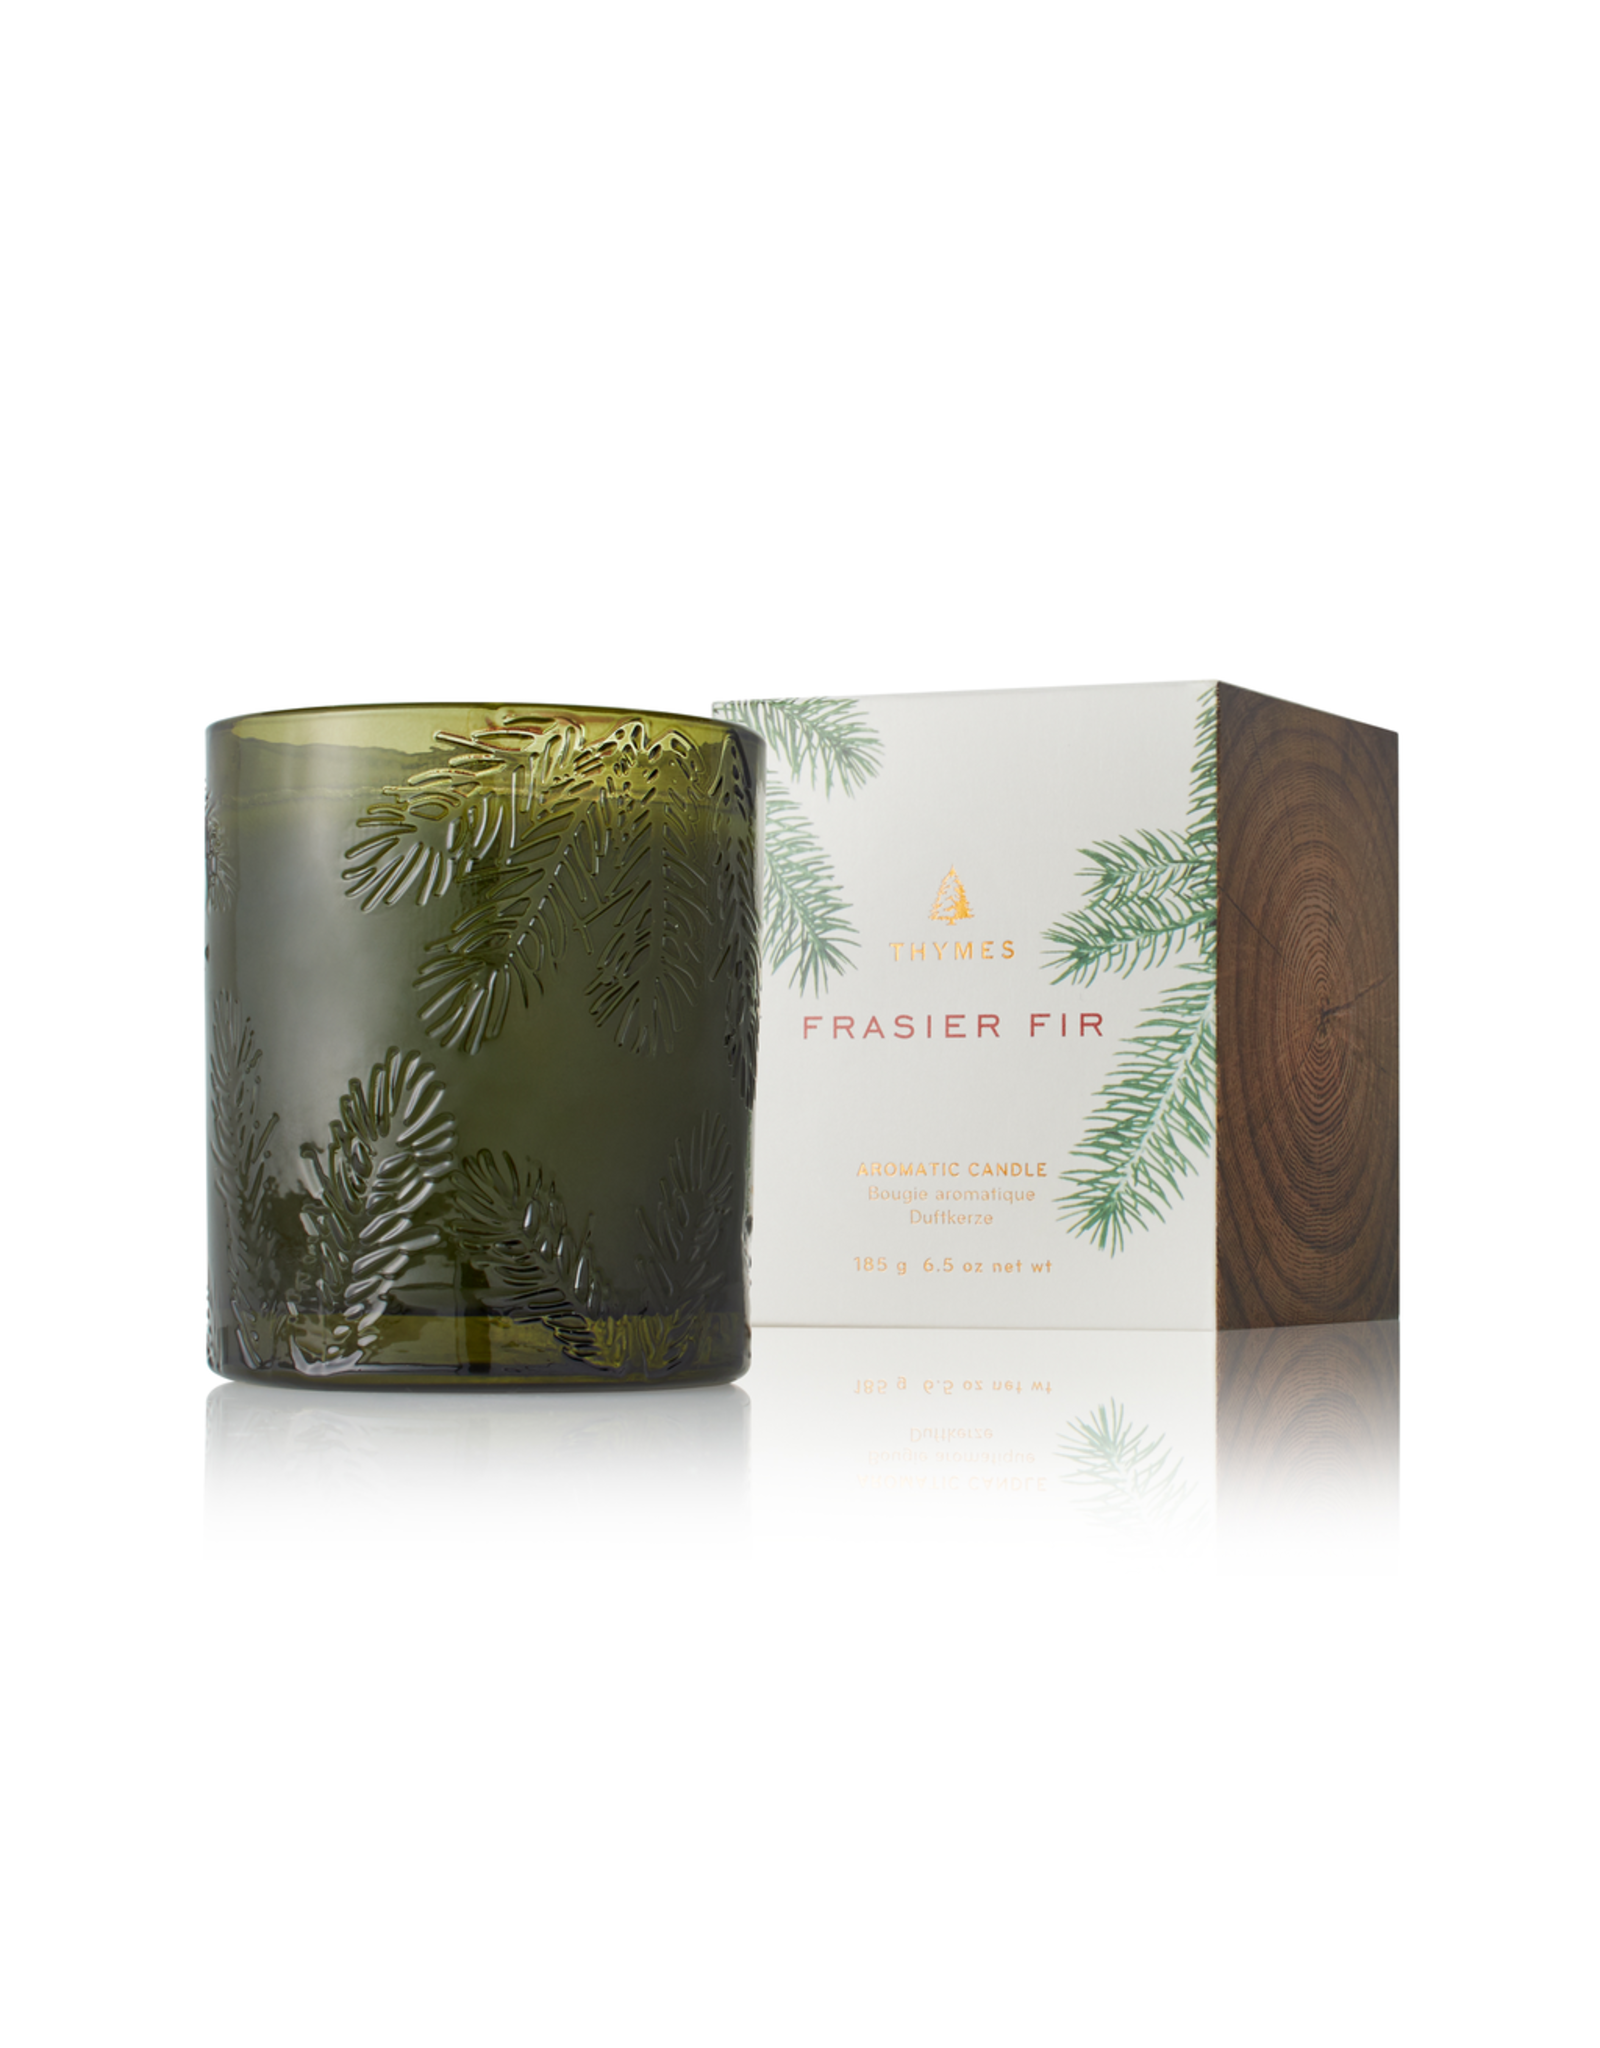 Frasier Fir Poured Candle Molded Green Glass 6.5 Oz